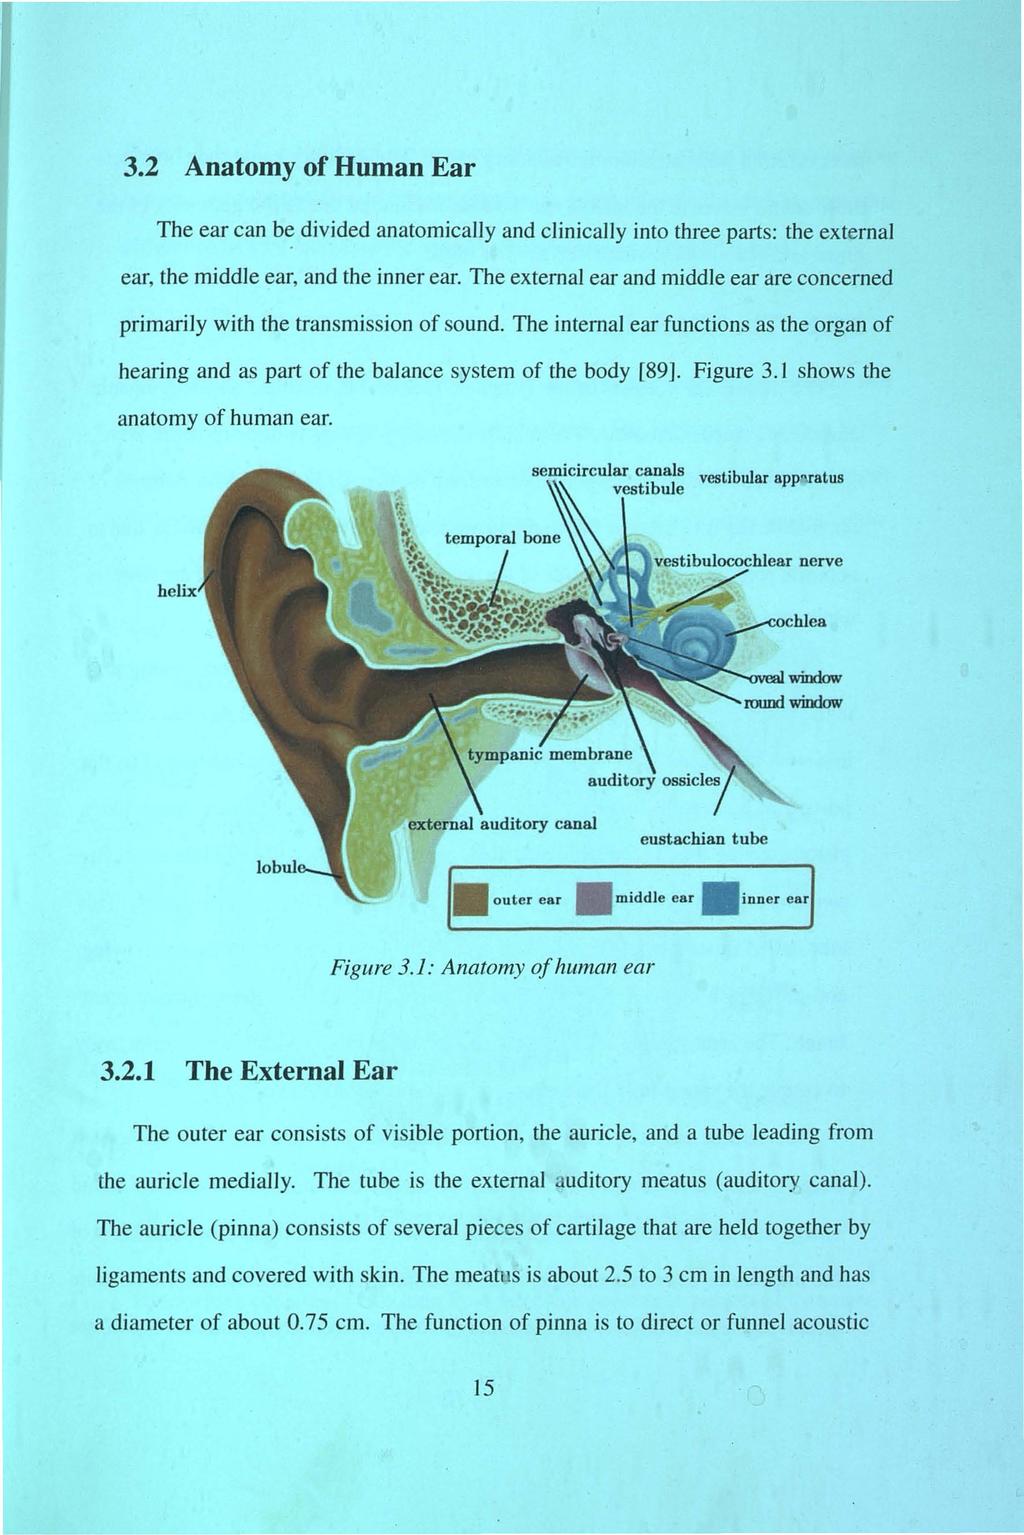 3.2 Anatomy of Human Ear The ear can be divided anatomically and clinically into three parts: the external ear, the middle ear, and the inner ear.